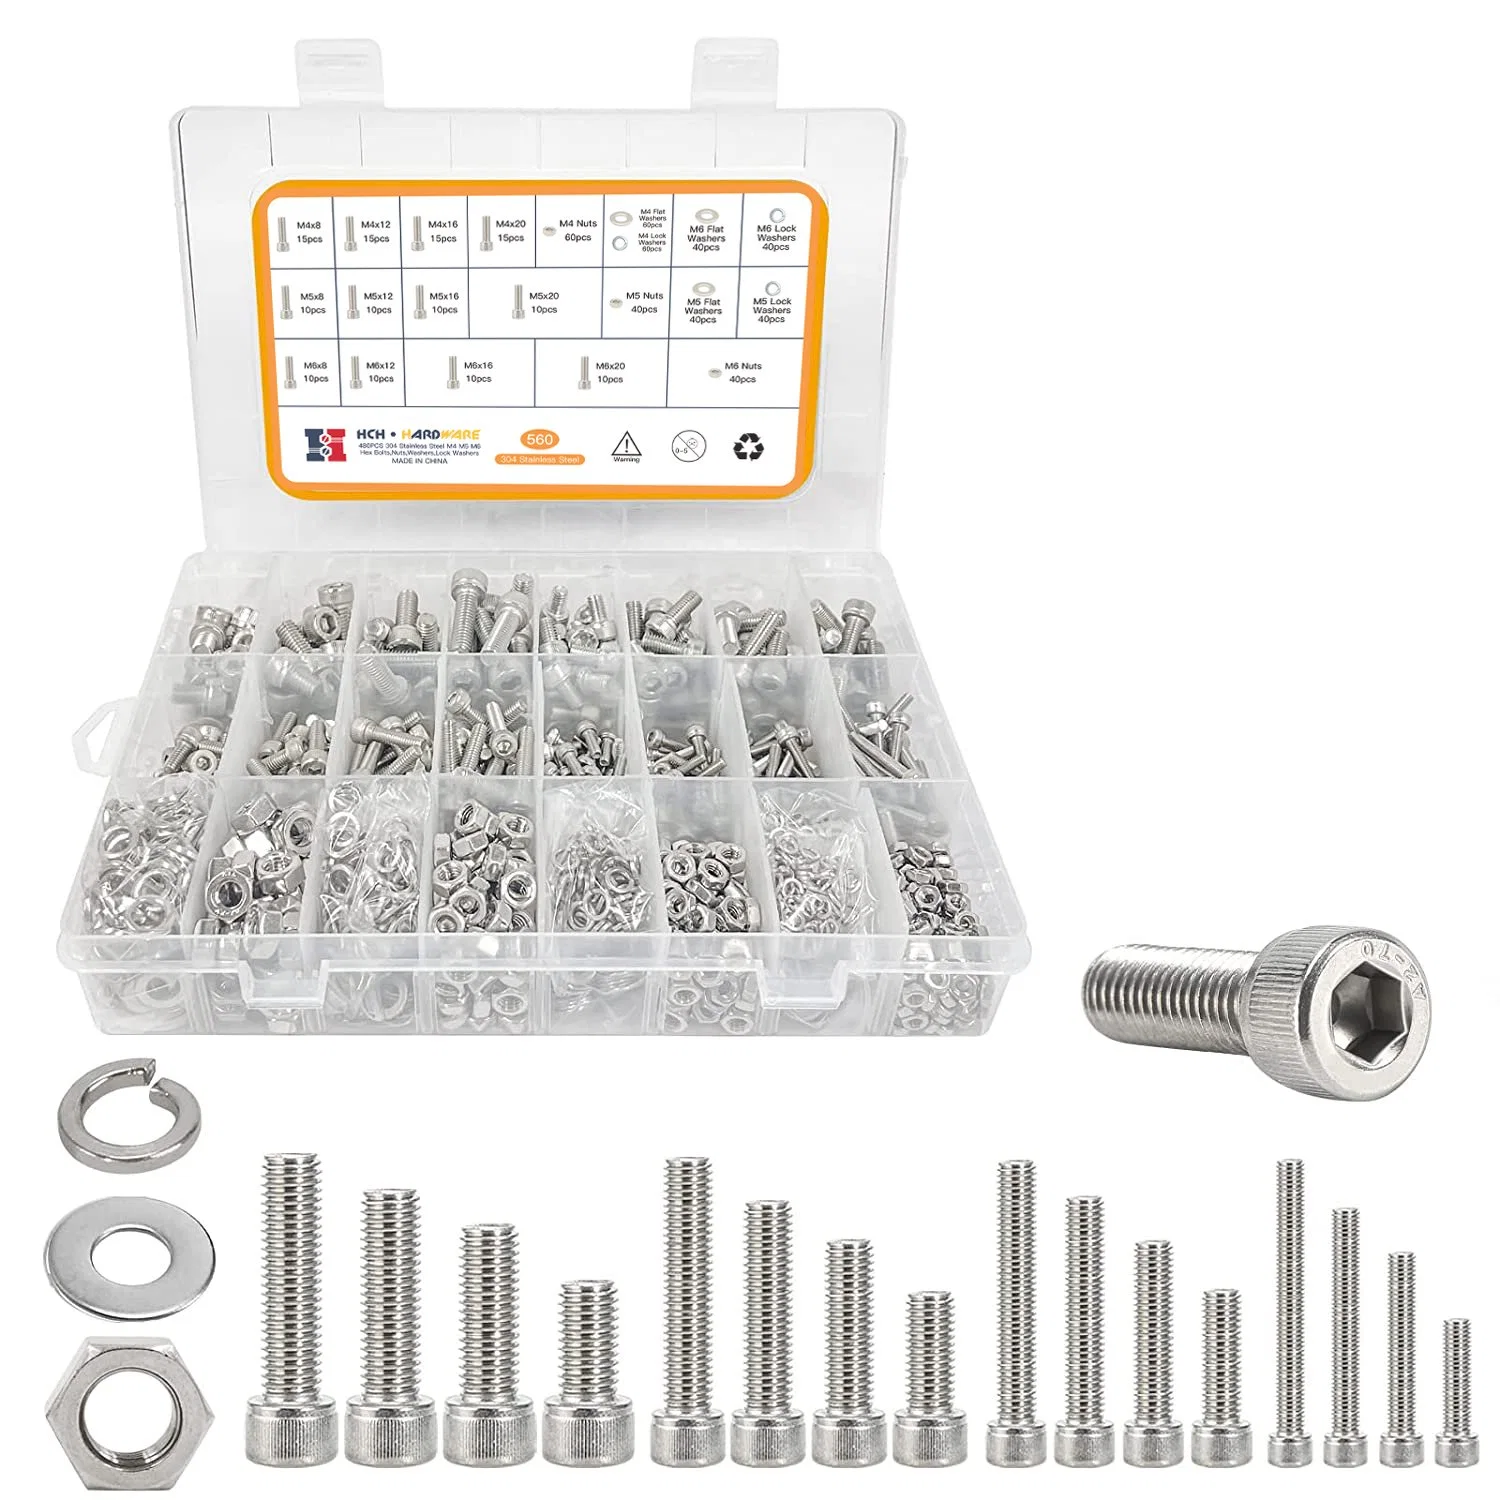 M6 M5 M4 Nuts and Bolts Assortment Kit, Stainless Steel Metric Assorted Machine Screws Set Allen Bolt Hex Socket Head with Flat